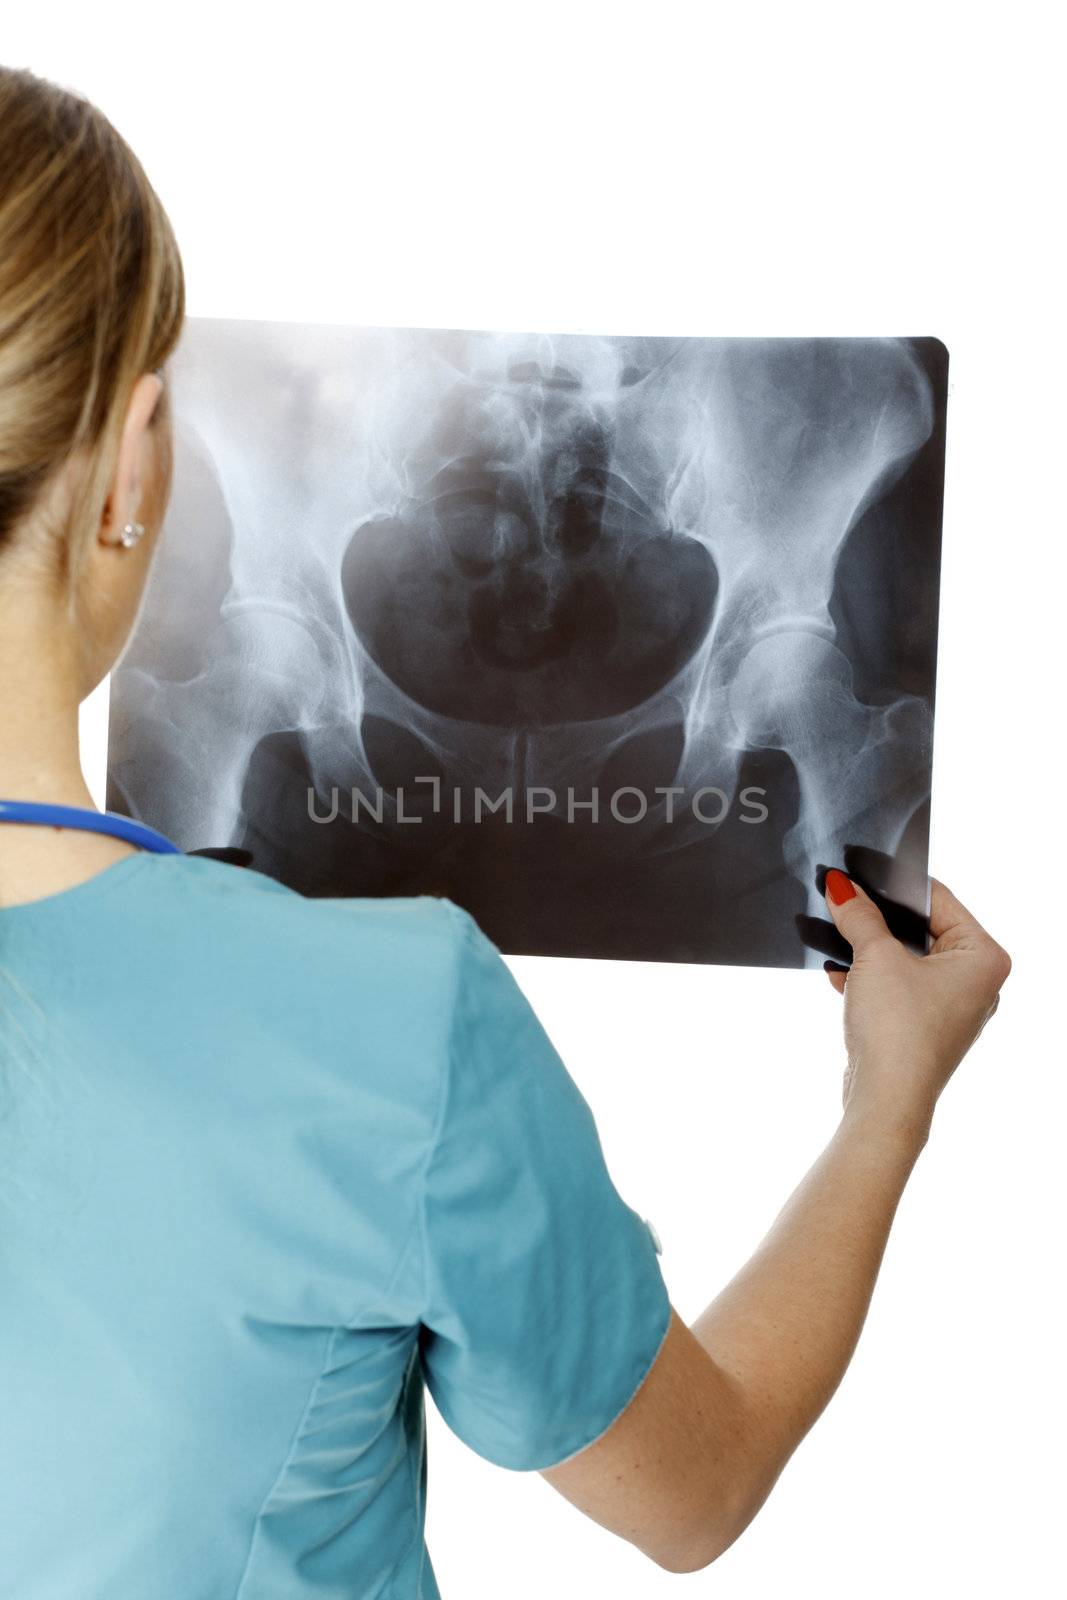 Female doctor examining an x-ray image. Focus is on the x-ray image.